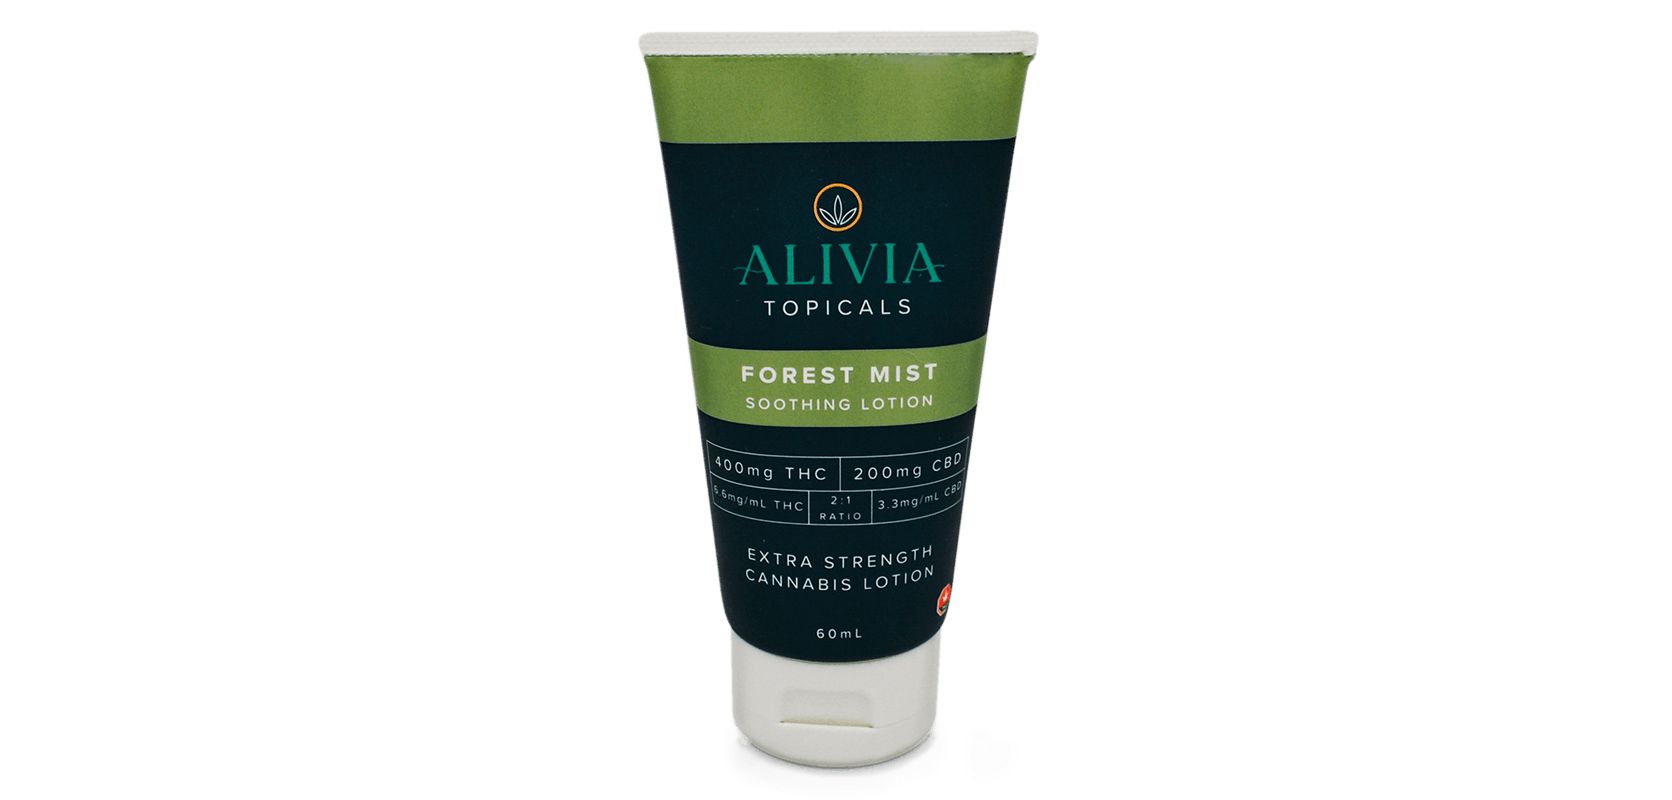 Buy Alivia’s Forest Mist pain cream with THC & CBD from our online weed dispensary today to say goodbye to your pain tomorrow. 